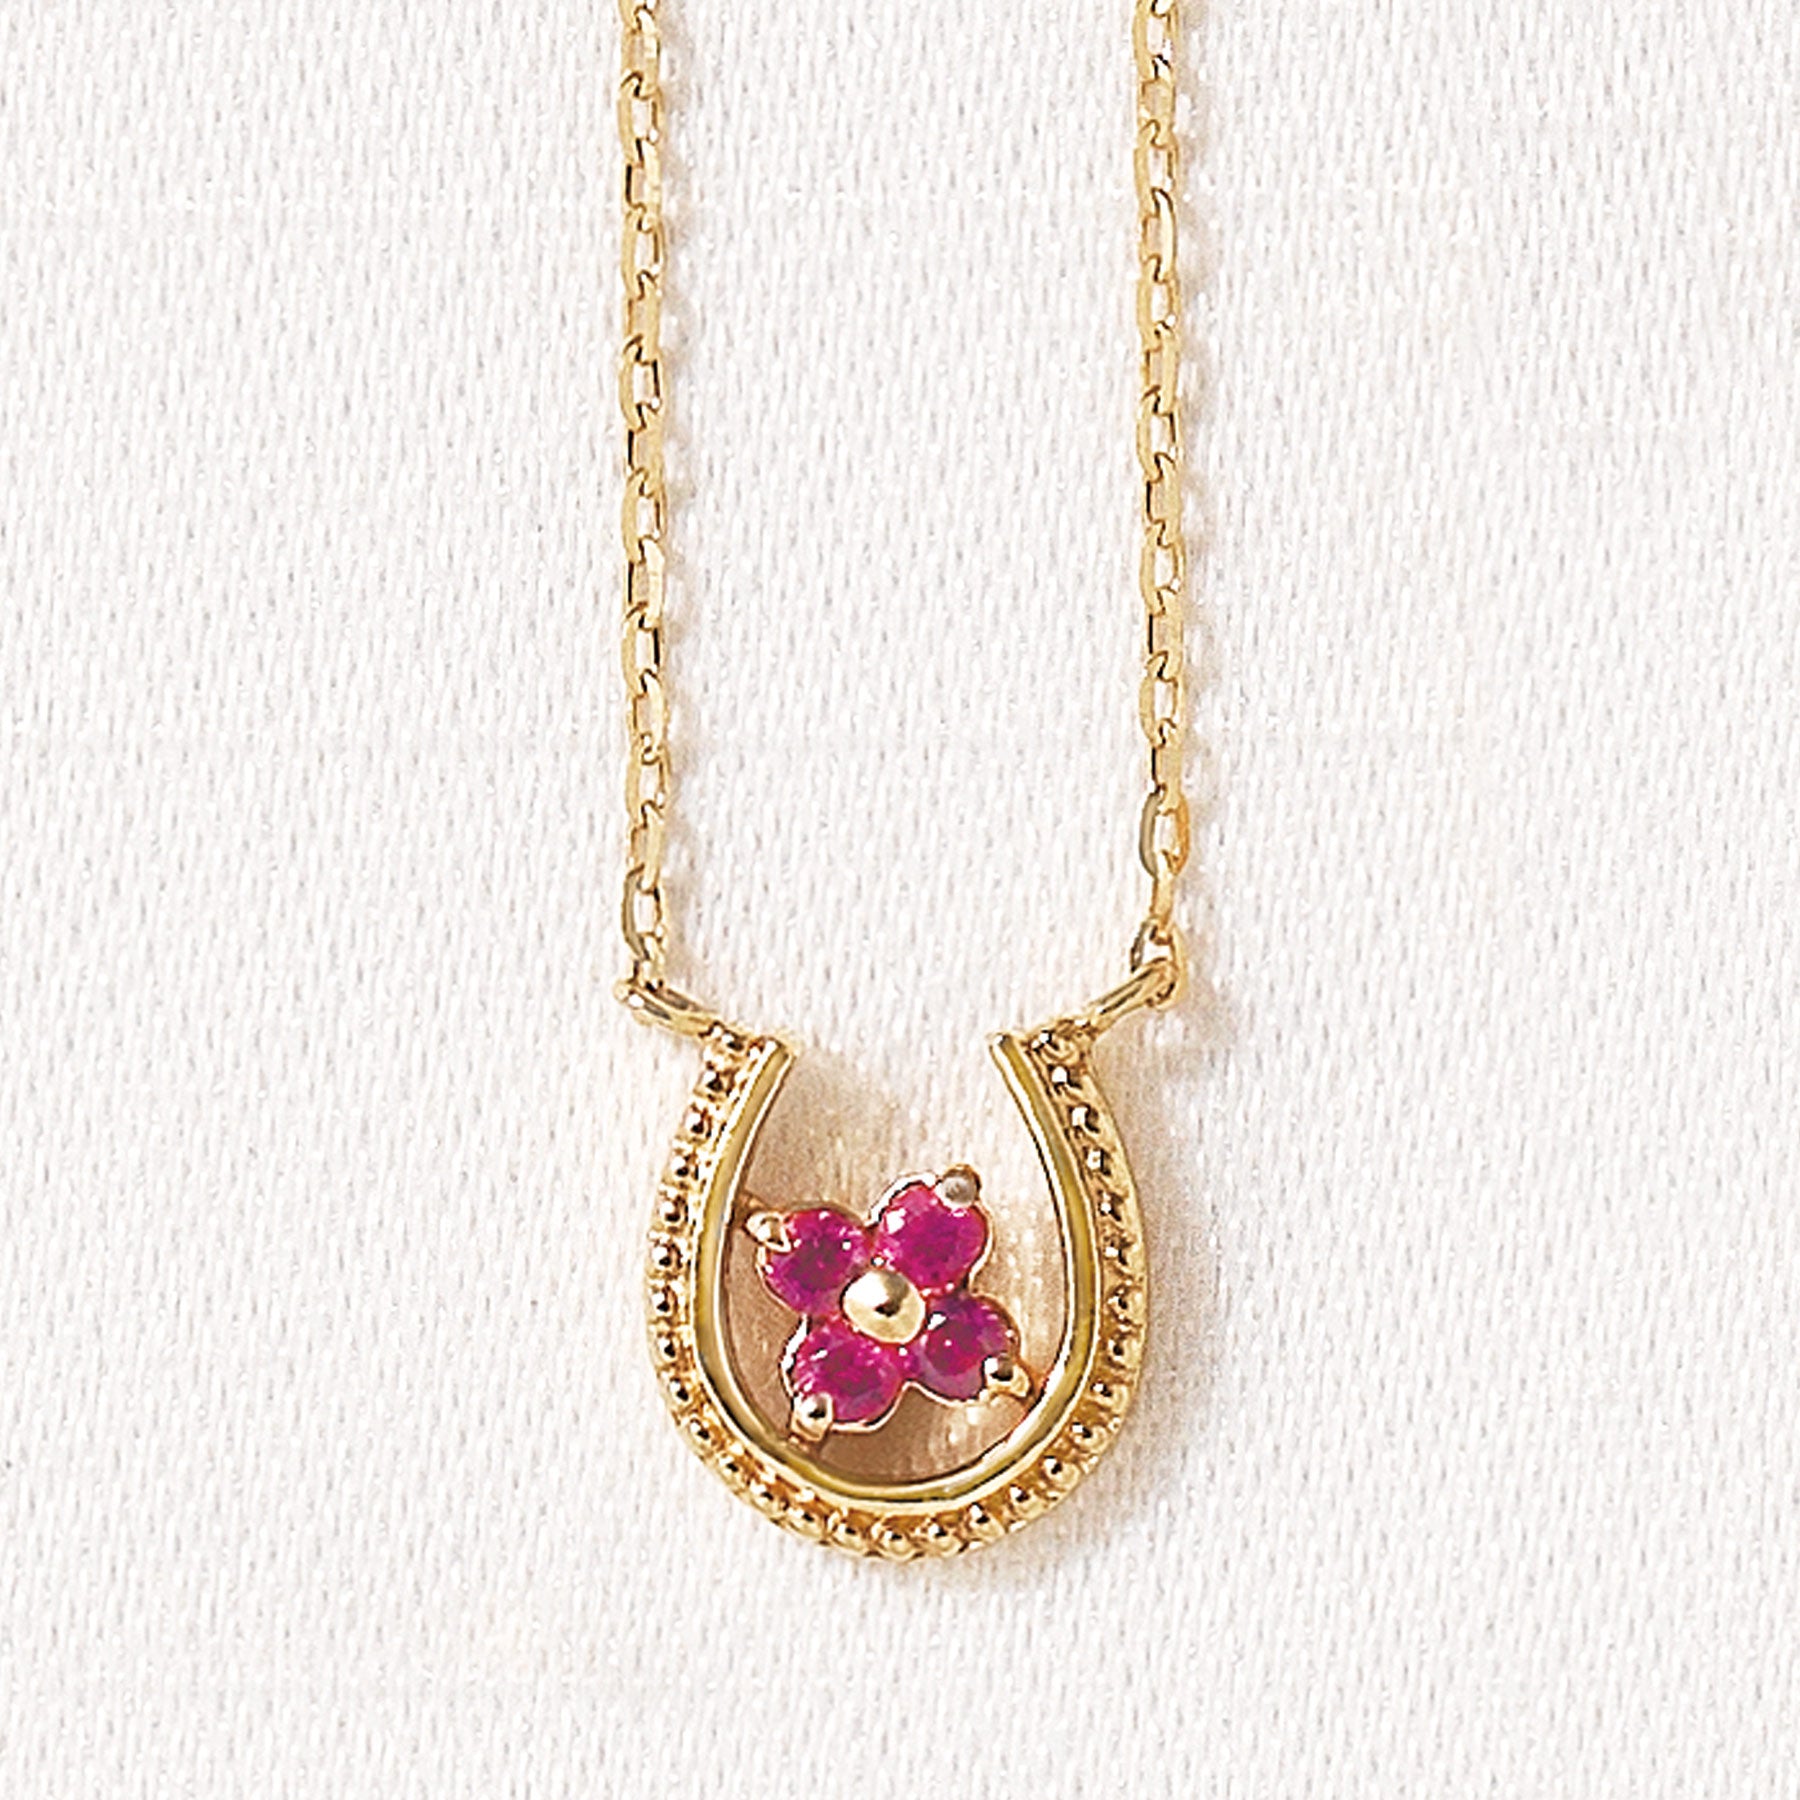 10K Yellow Gold Ruby Double Happiness Necklace - Product Image